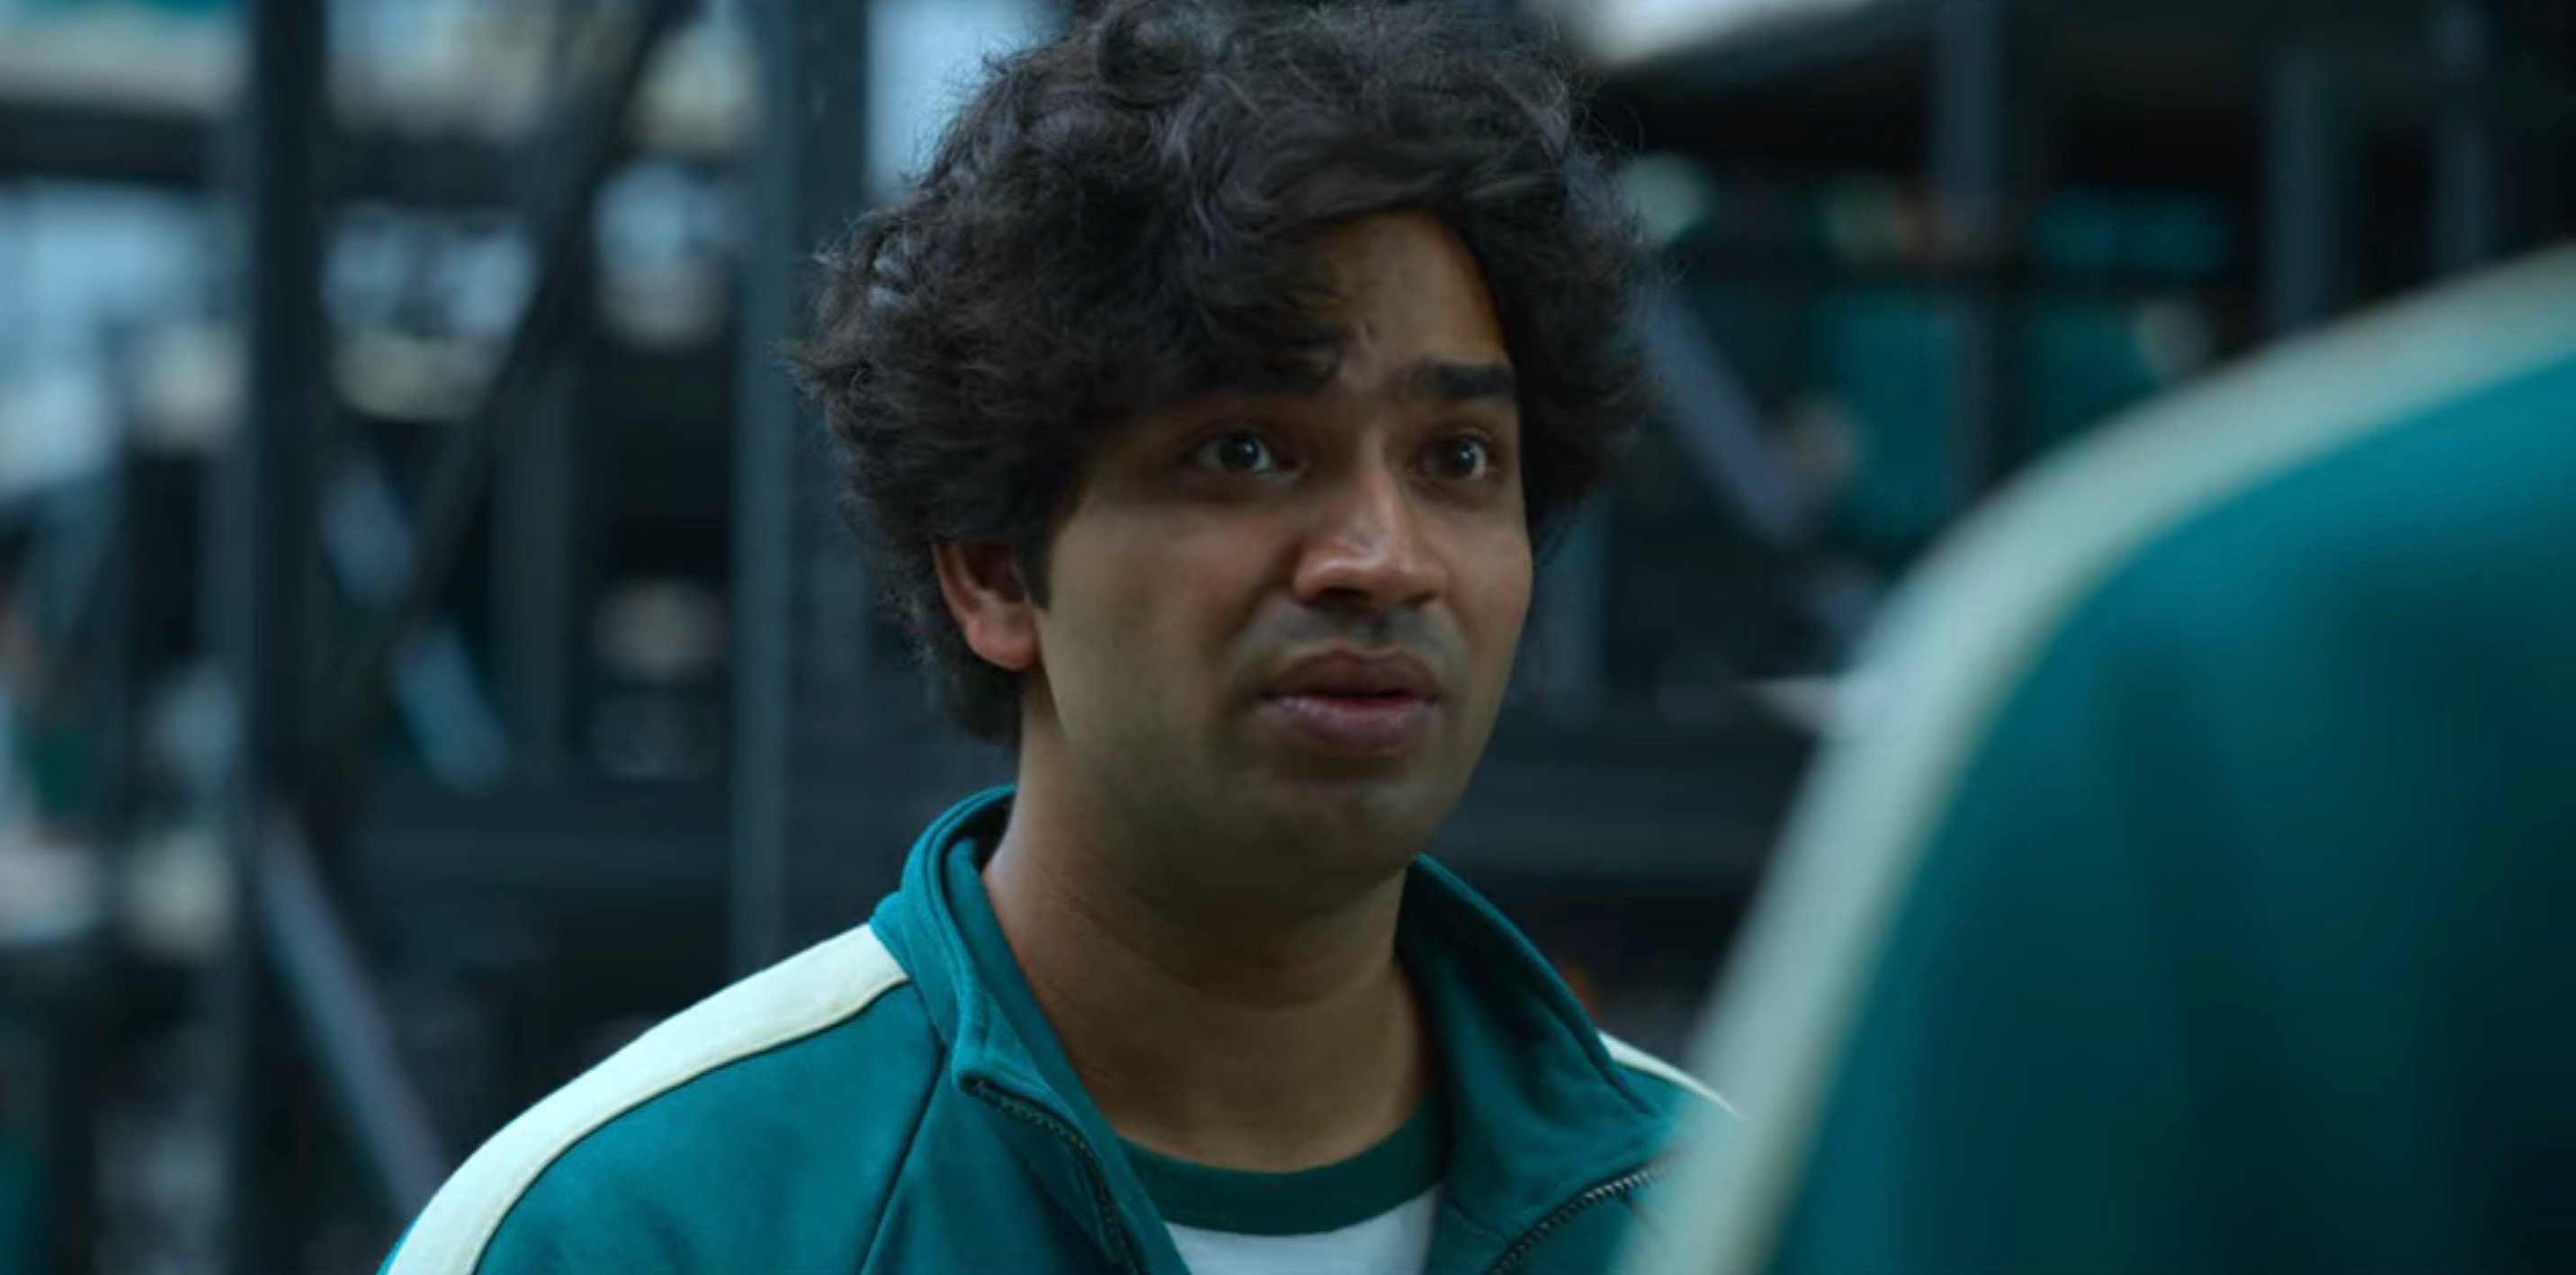 Anupam Tripathi as Ali Abdul for Netflix's 'Squid Game' wearing green tracksuit.